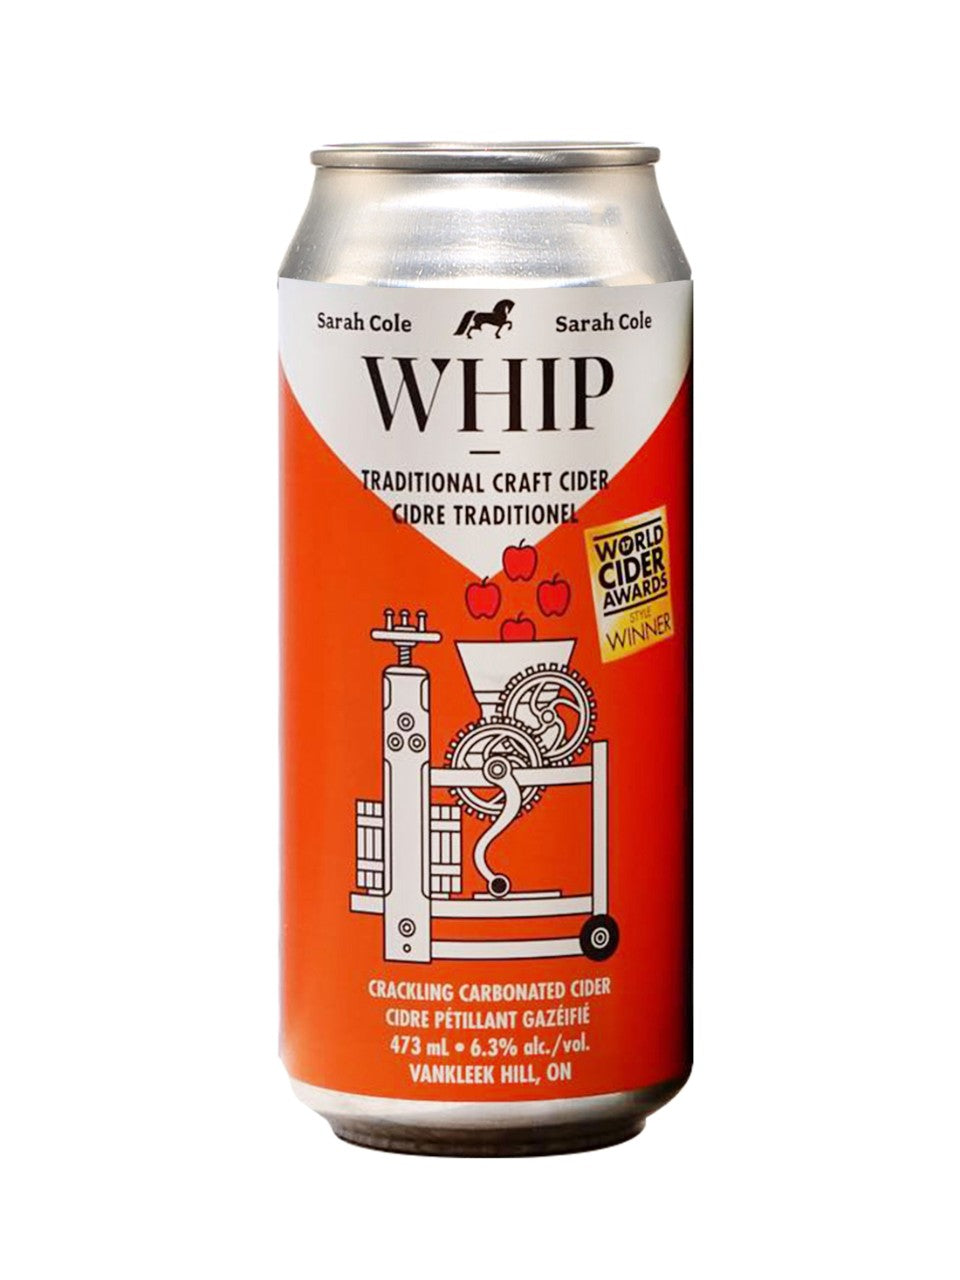 Sarah Cole Whip Cider 473 mL can